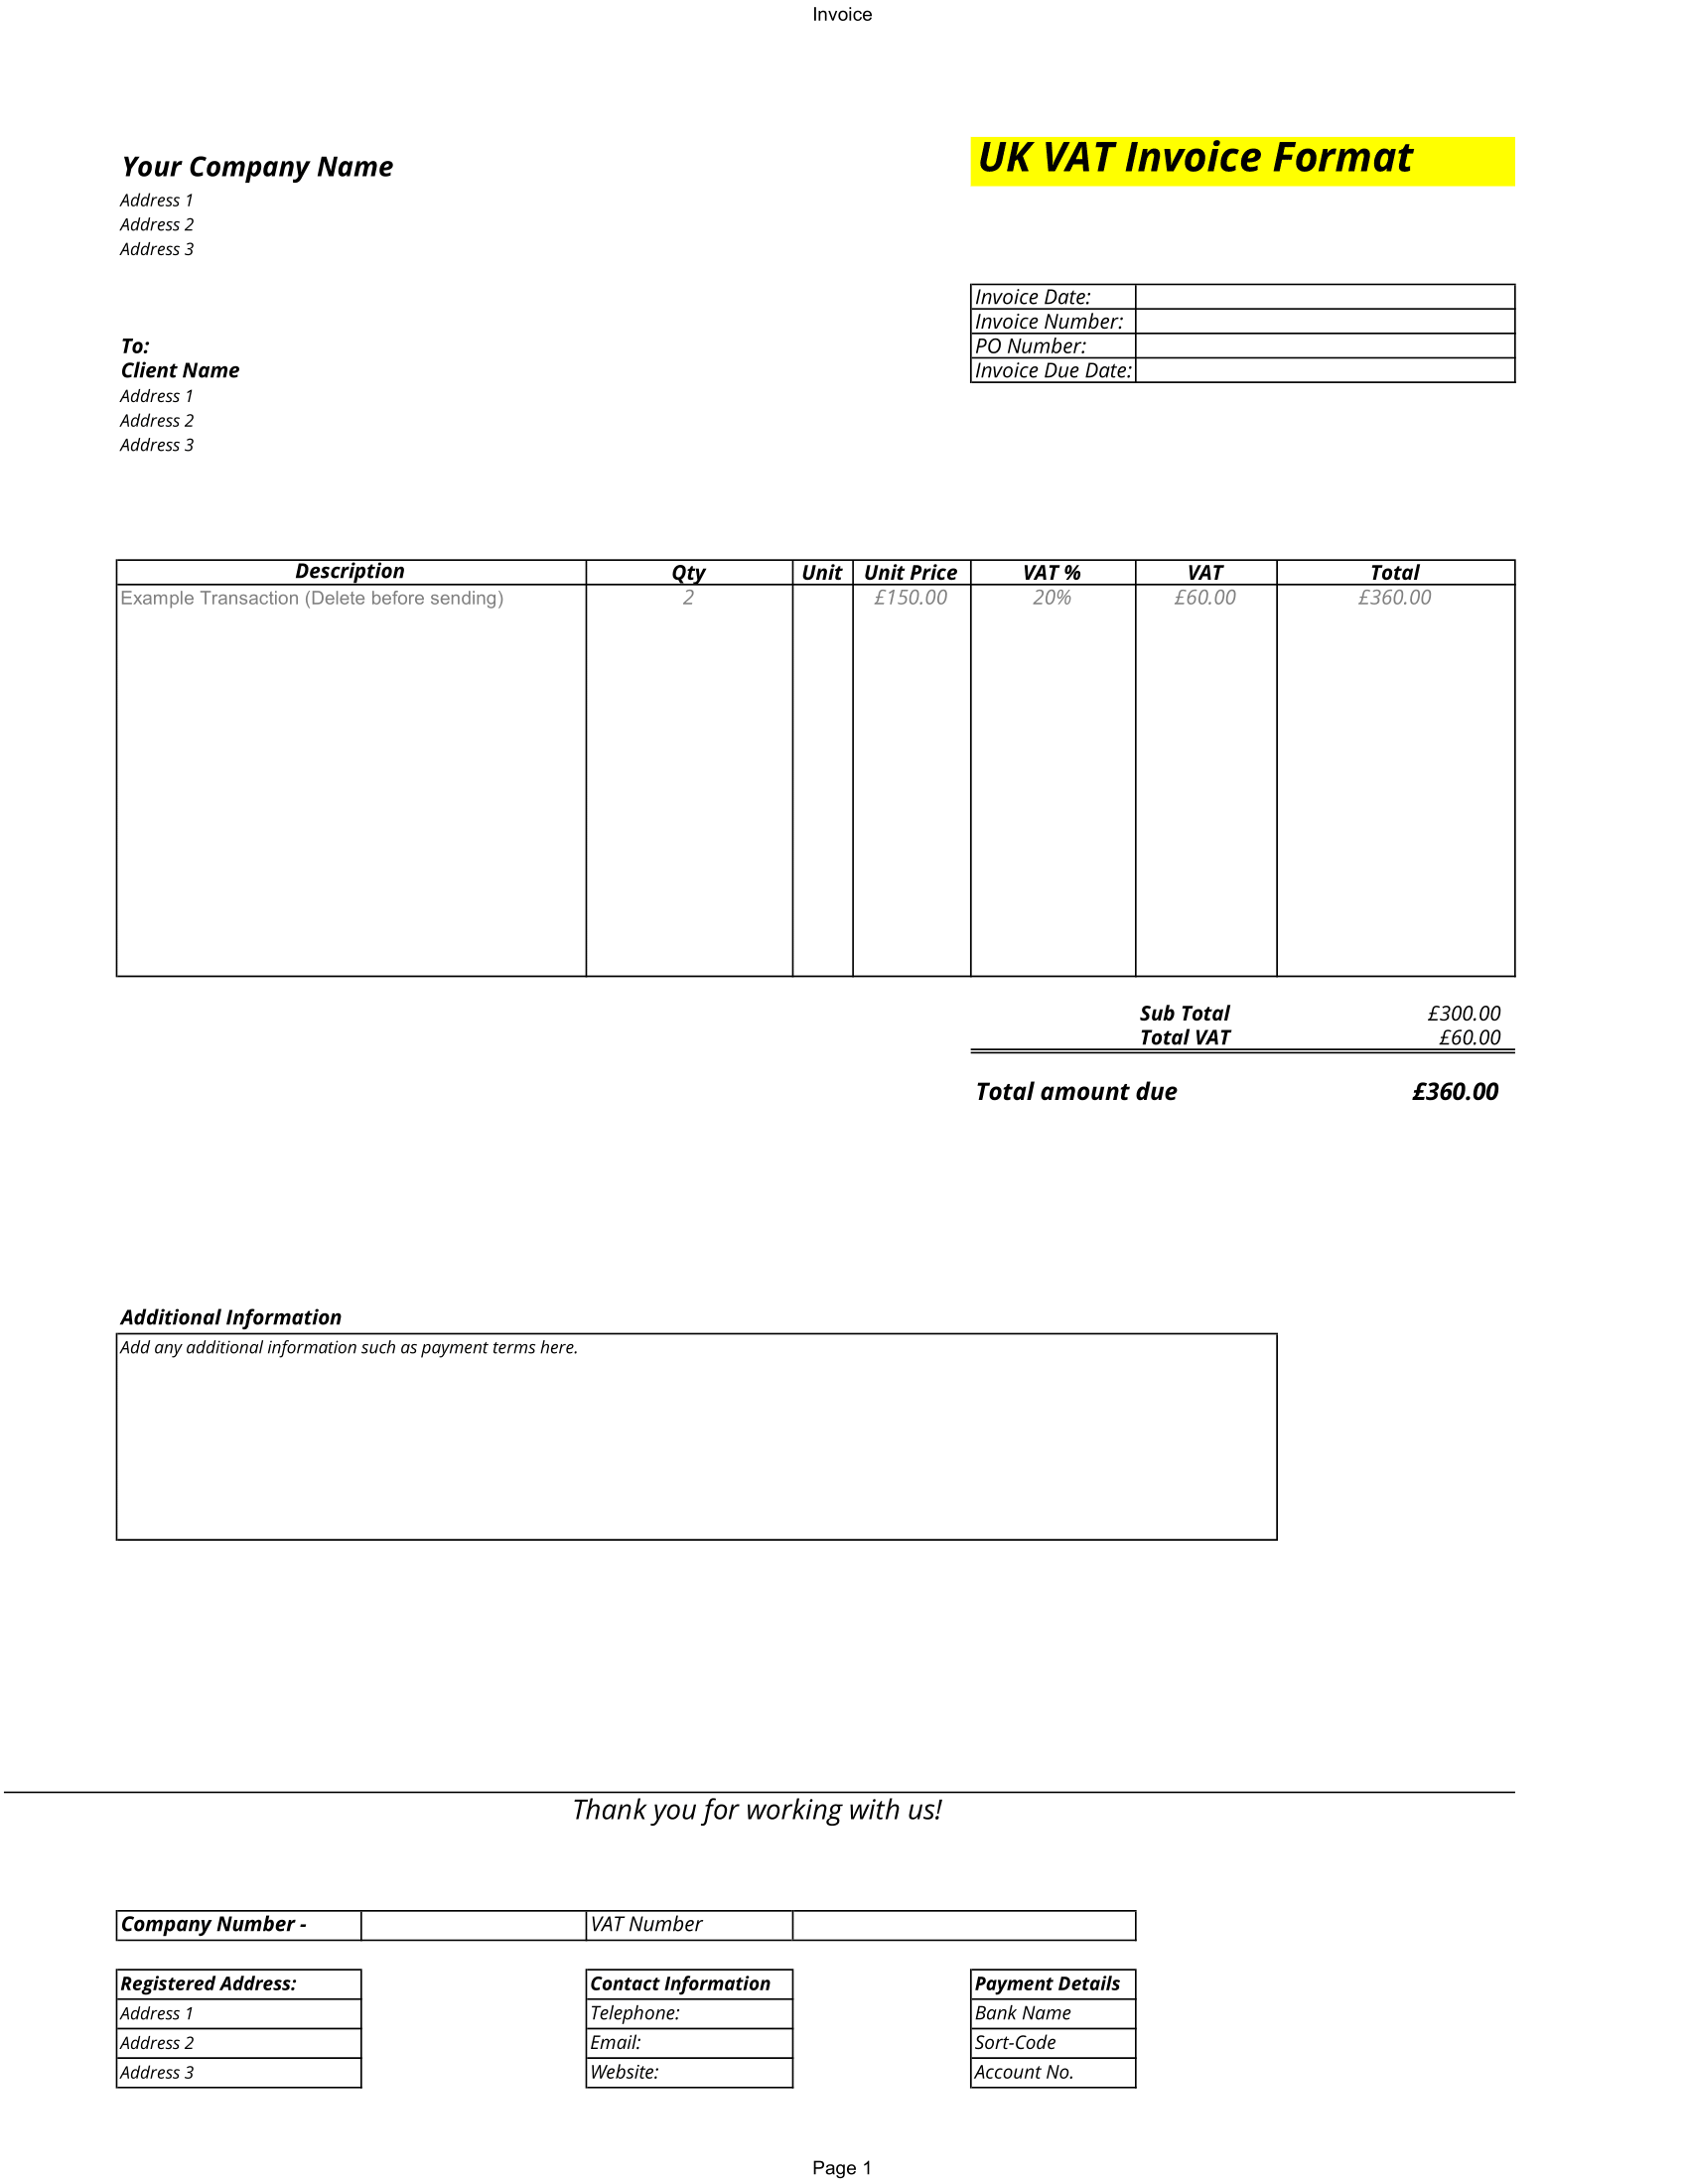 UK VAT Invoice Template for business and personal use.